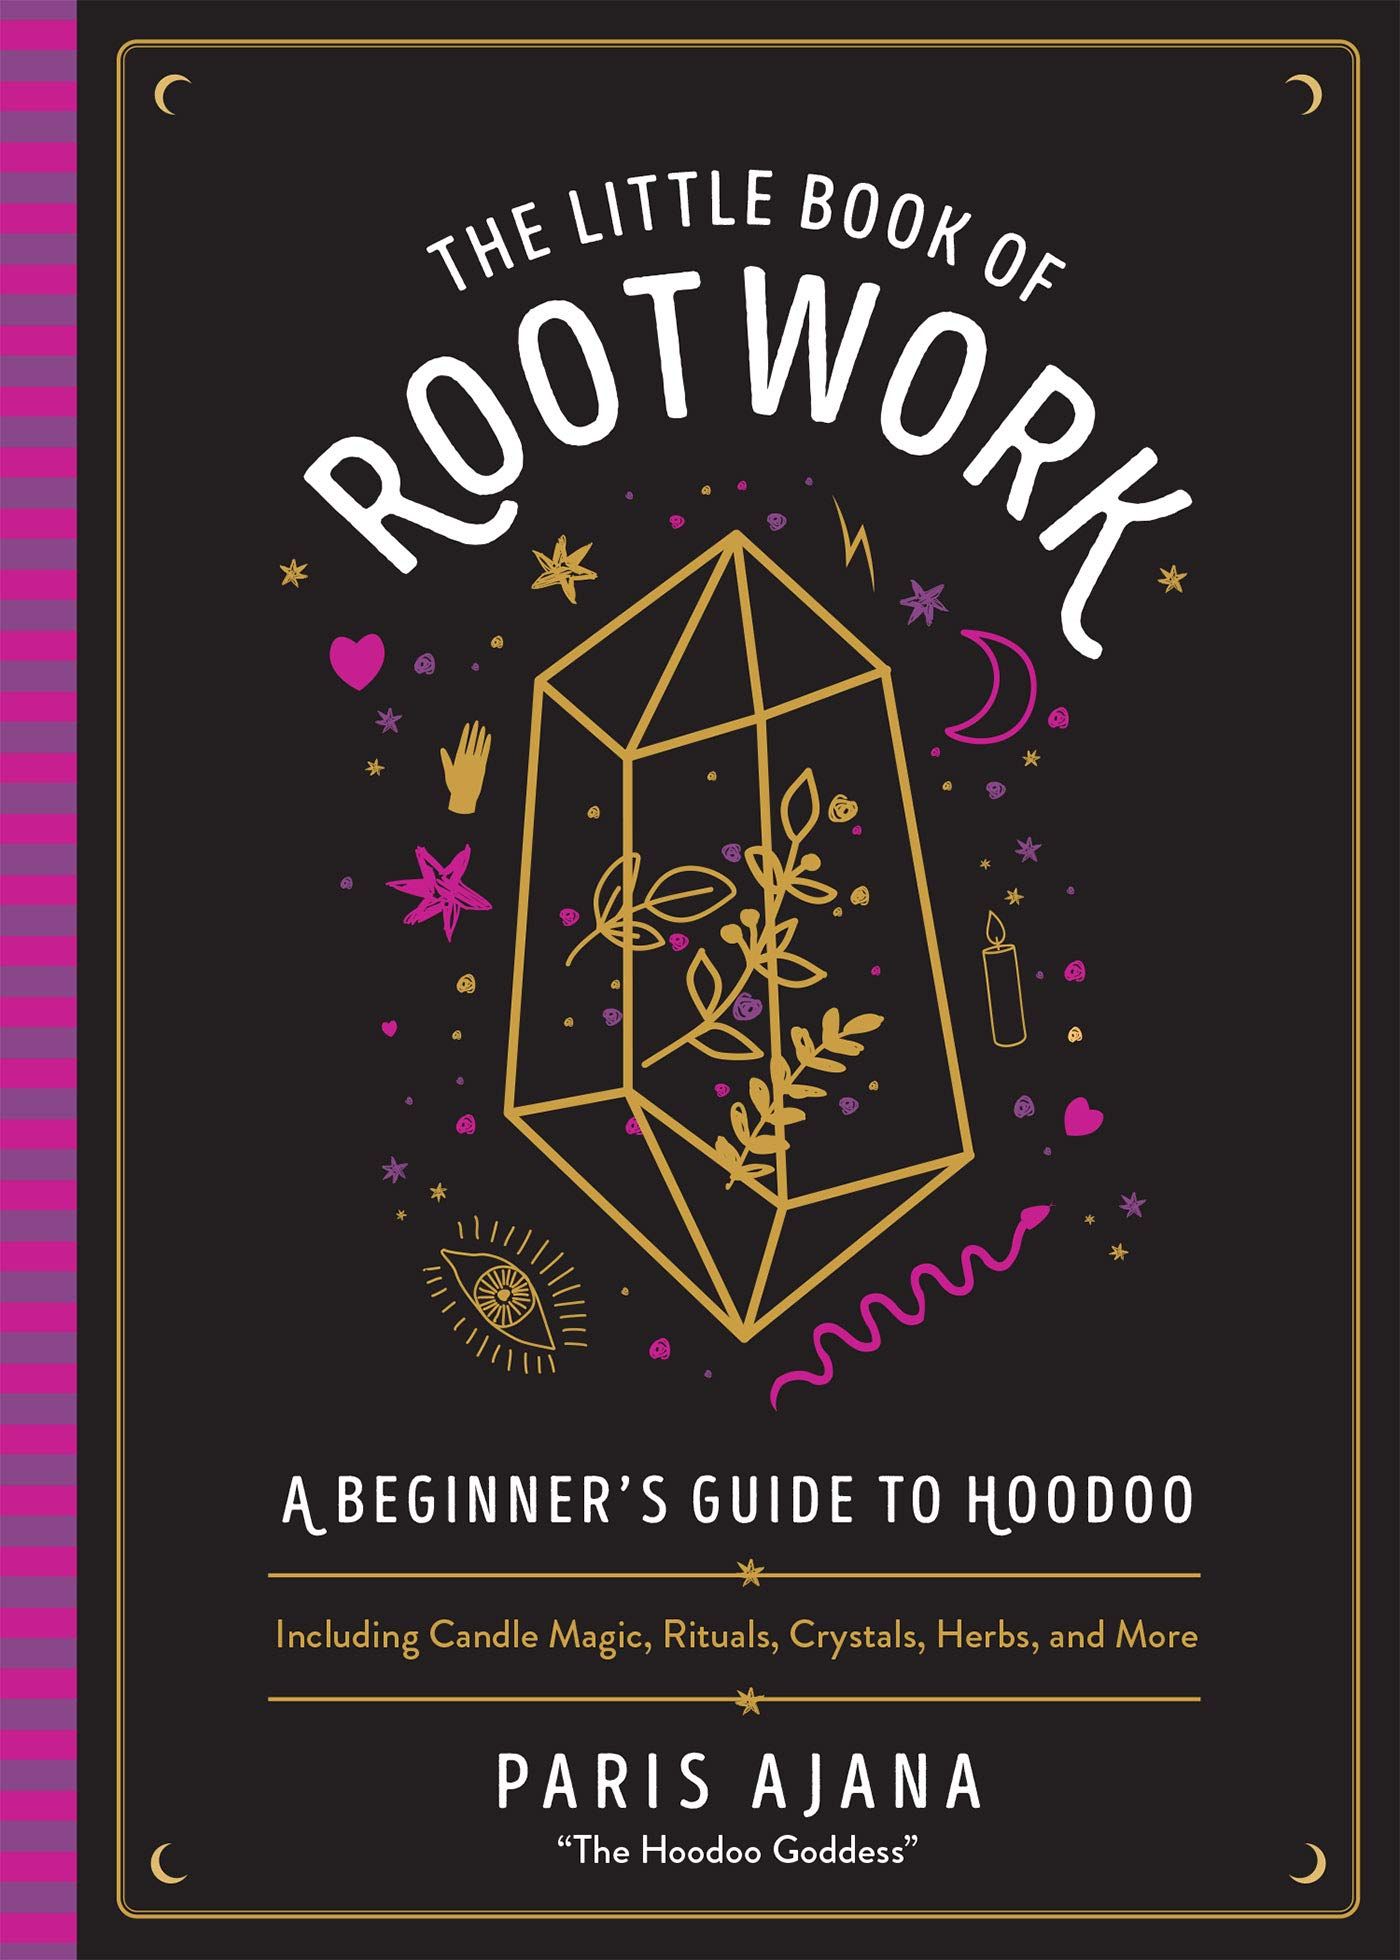 The Little Book Of Rootwork : A Beginner's Guide to Hoodoo - Including Candle Magic, Rituals, Crystals, Herbs, and More